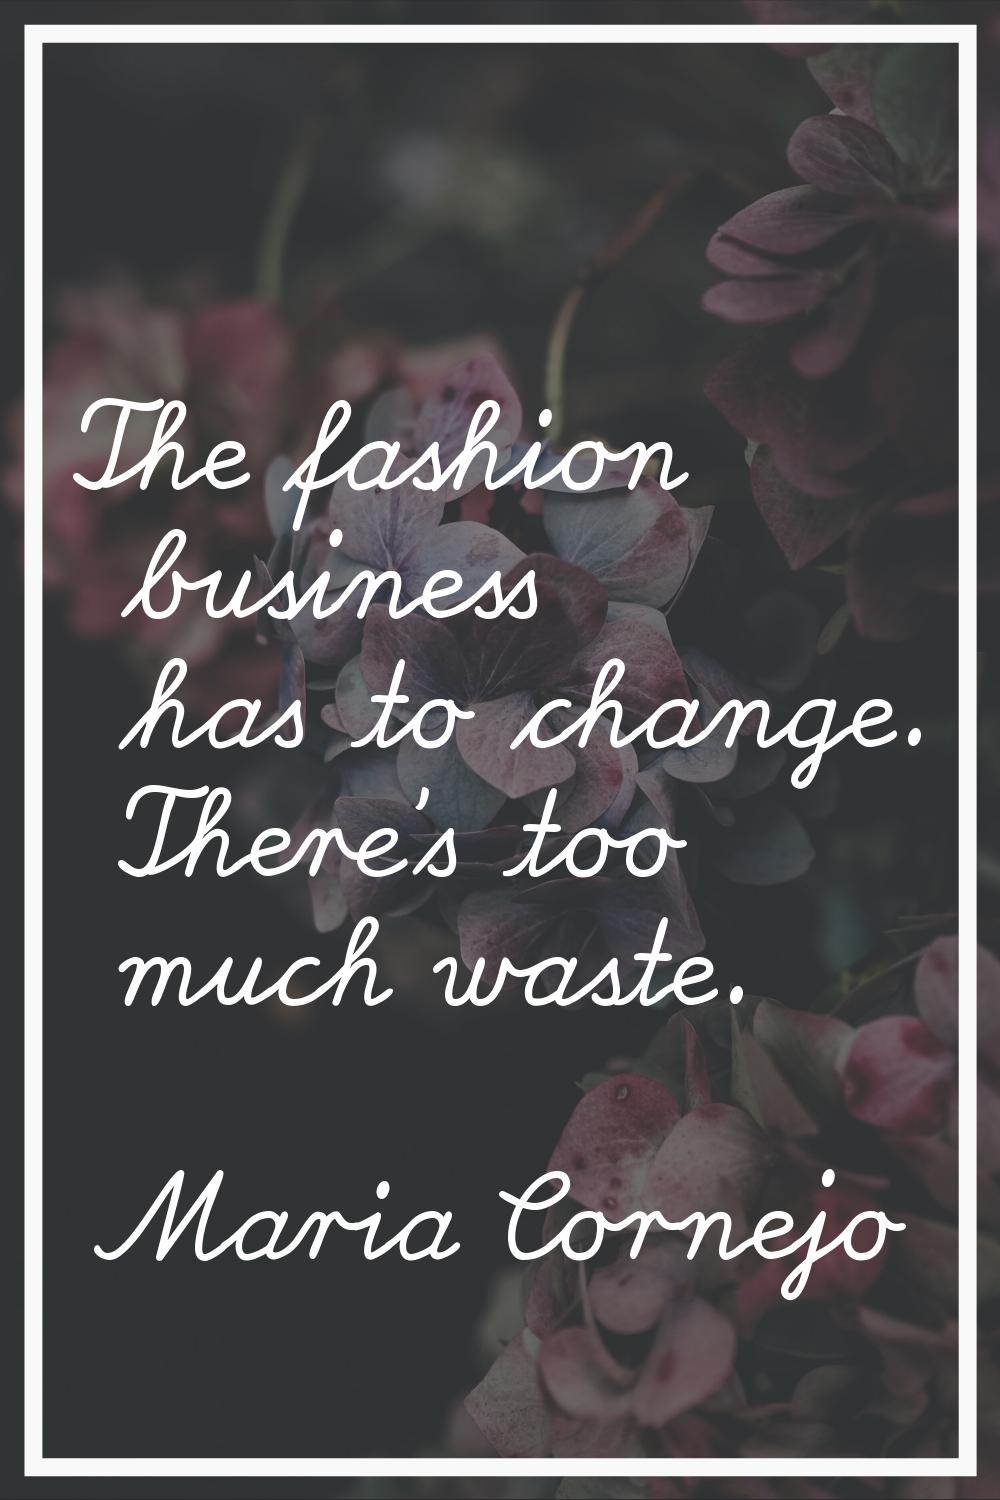 The fashion business has to change. There's too much waste.